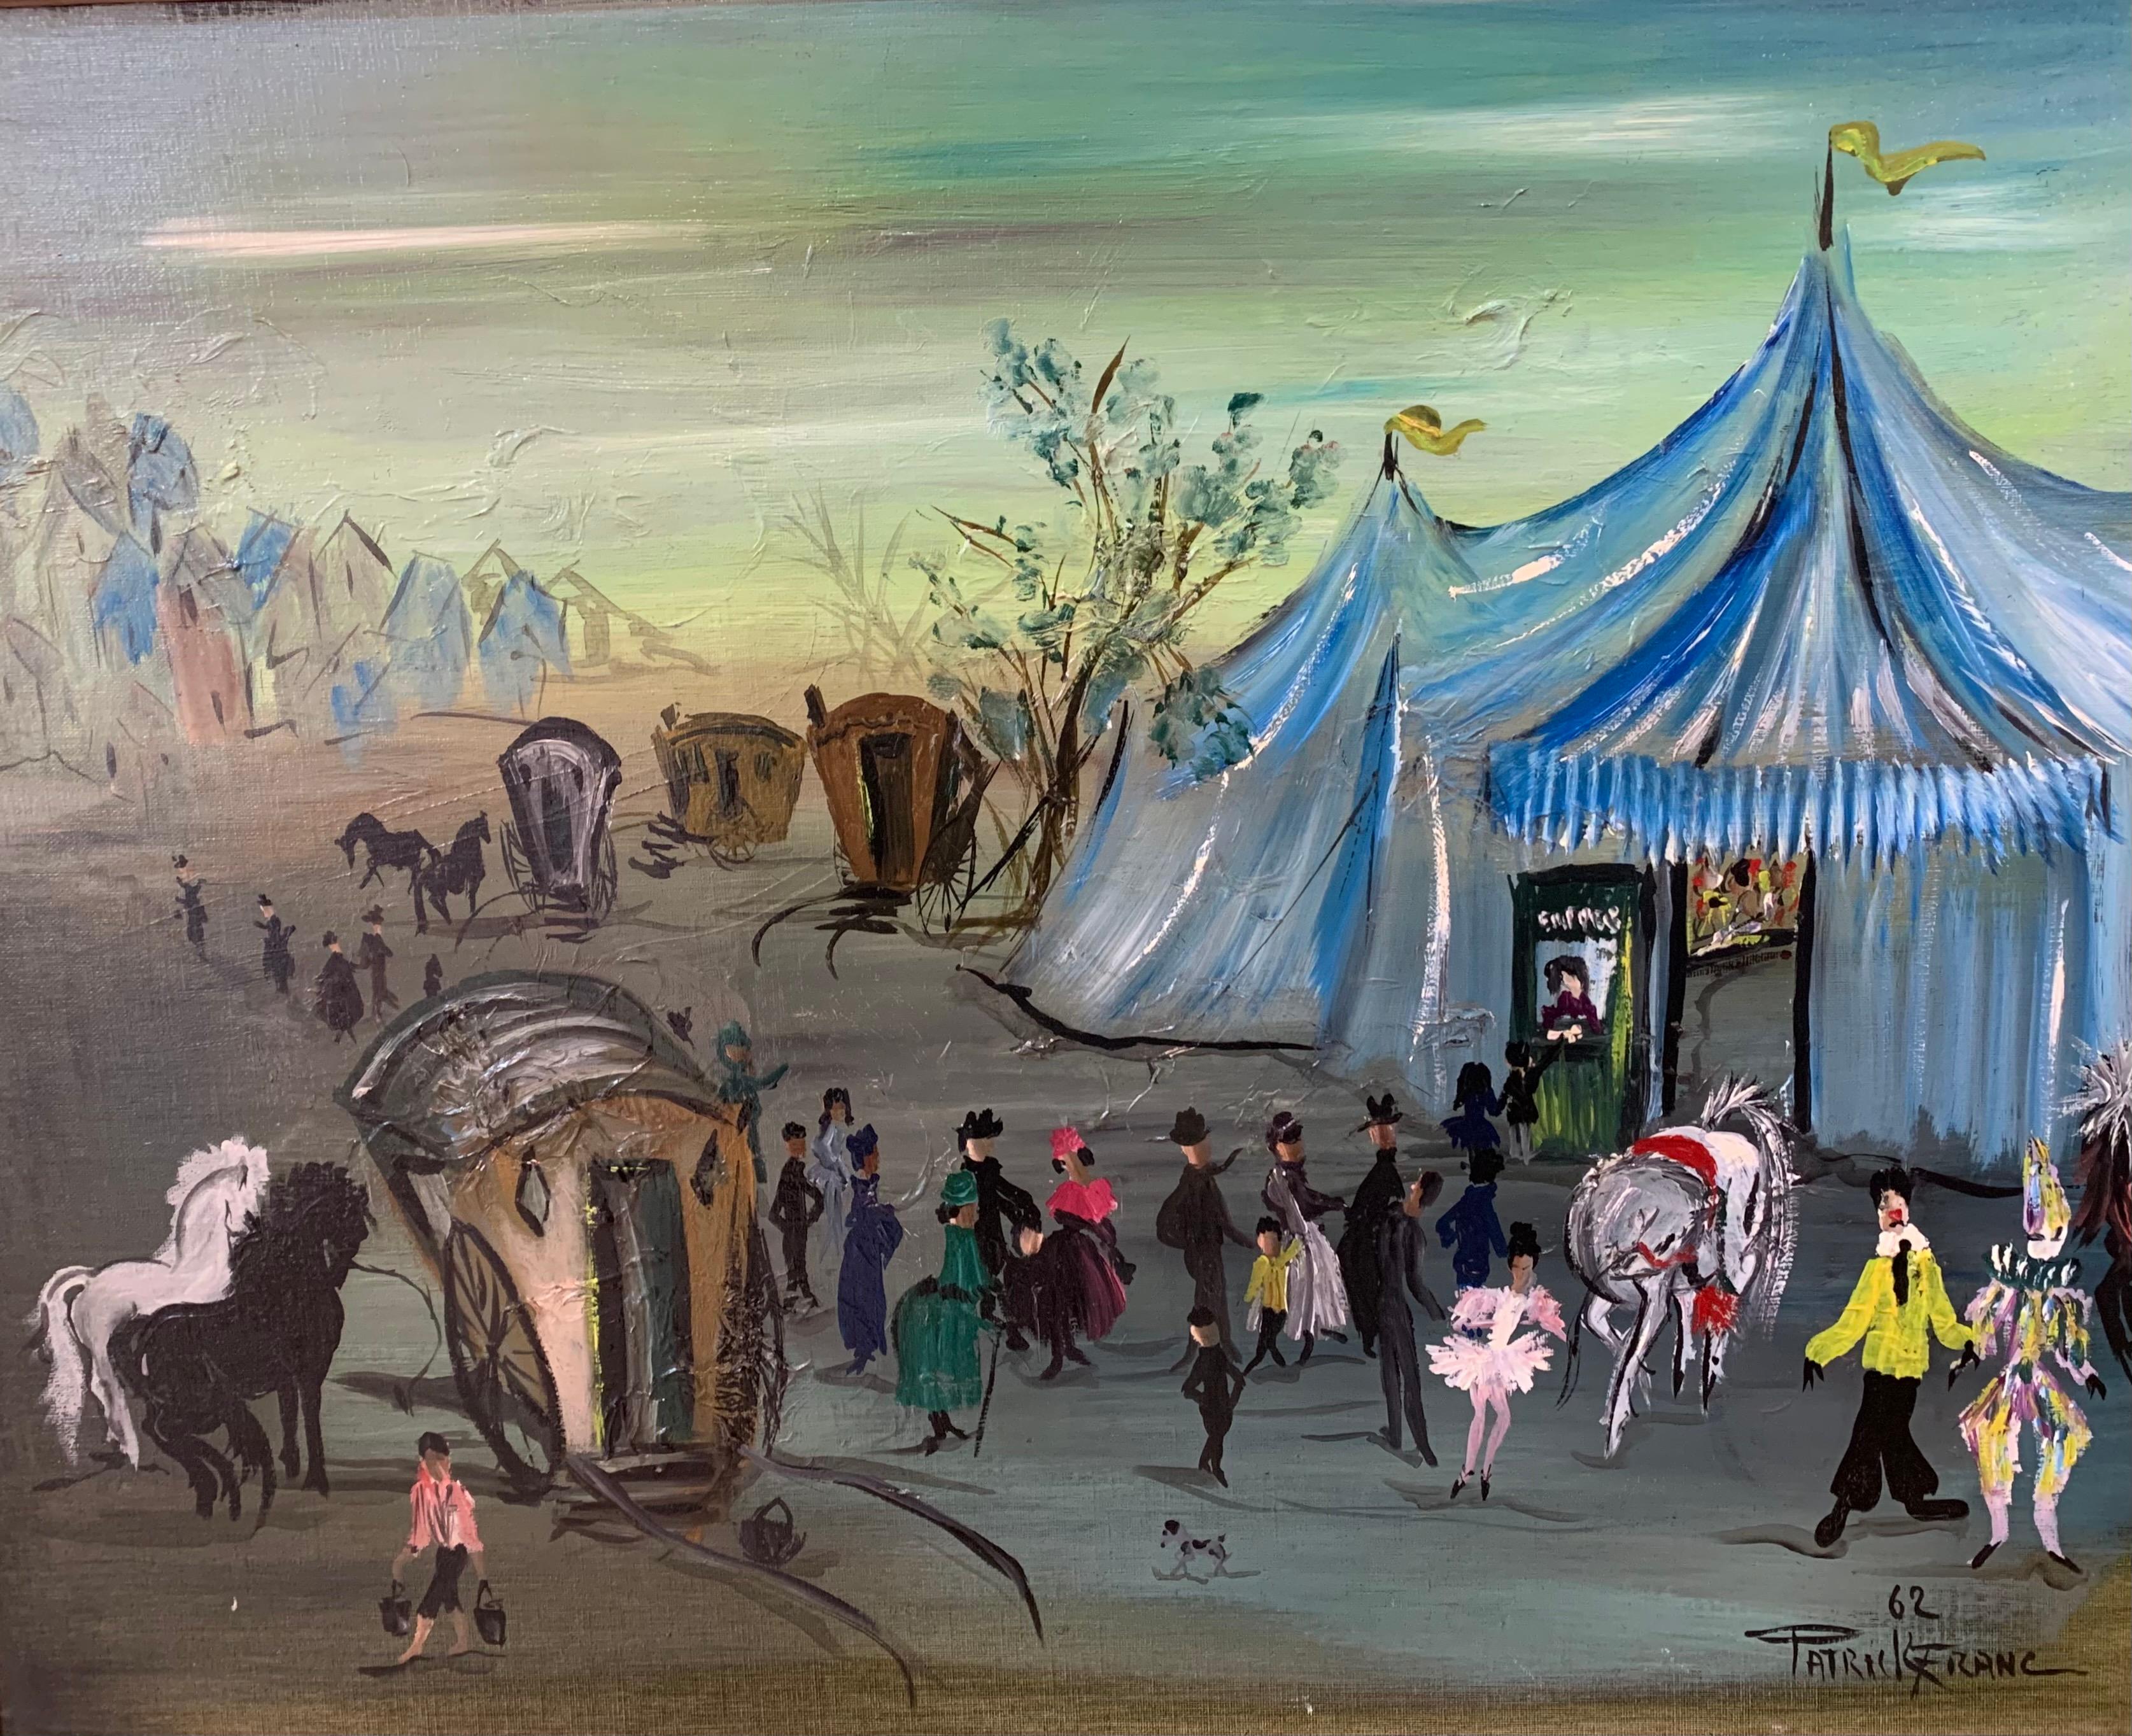 The Circus, The Party Is Here!

Oil on board signed bottom left Patrick Franc and dated 1962

Dimensions: 50 x 65 cm ( 19.685 x 25.591 inches)

Dimensions  with frame:  56 x 71 x 1 cm ( 22.047 x 27.953 x 0.394 inches)

Within its original